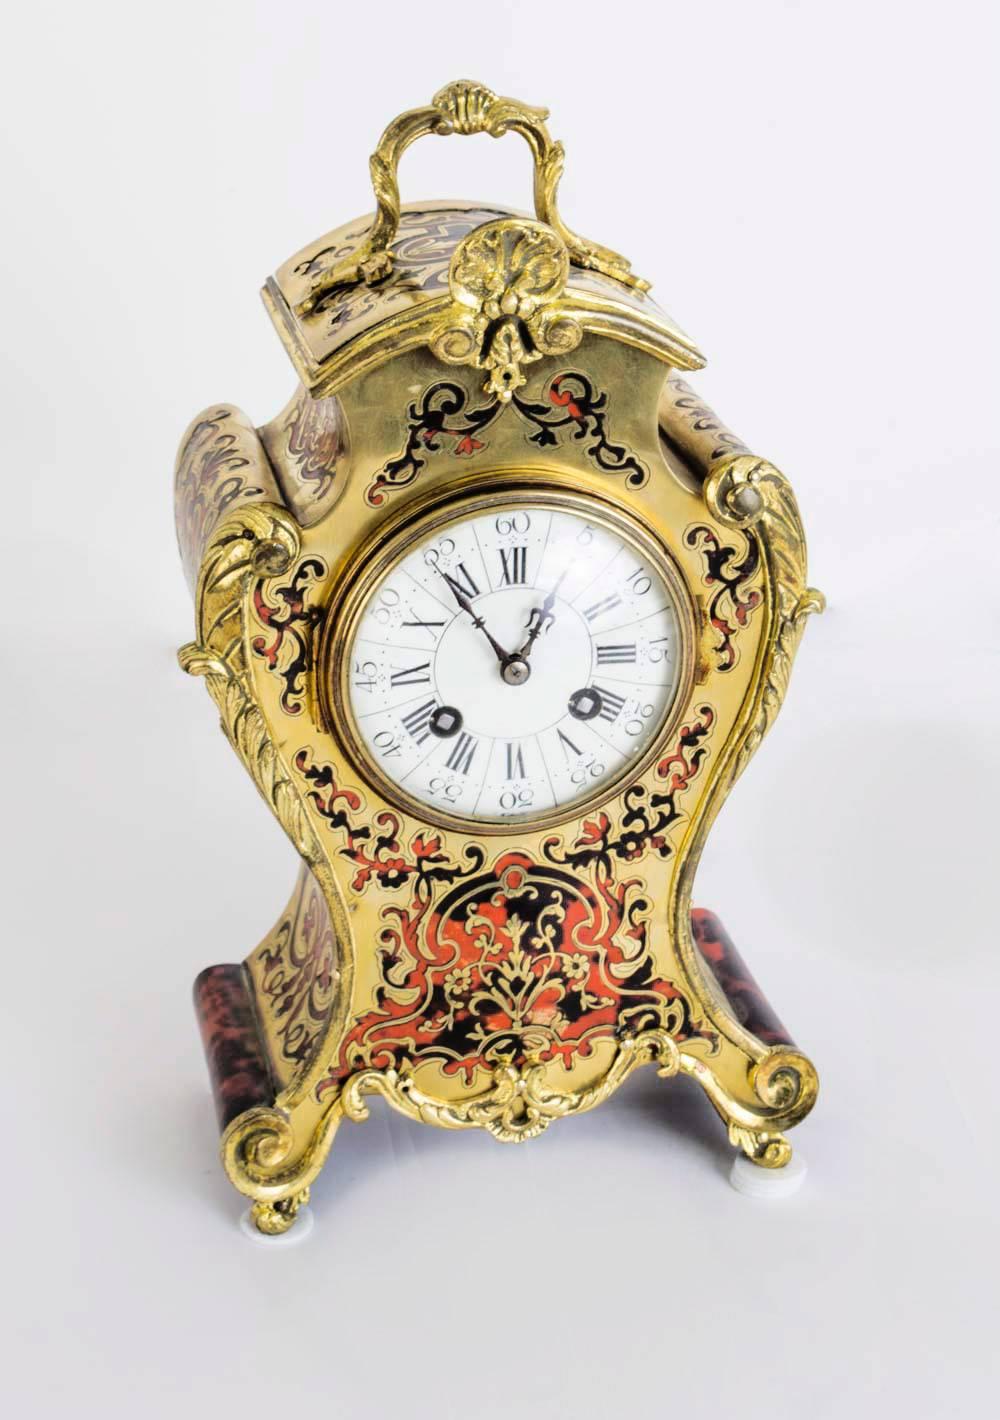 This is a fabulous antique French shell red Boulle cut brass ormolu mantel clock, circa 1880 in date.

The top has a brass handle above scrolling sides with acanthus decoration.

The movement is stamped 10066 & 46.

It has a white